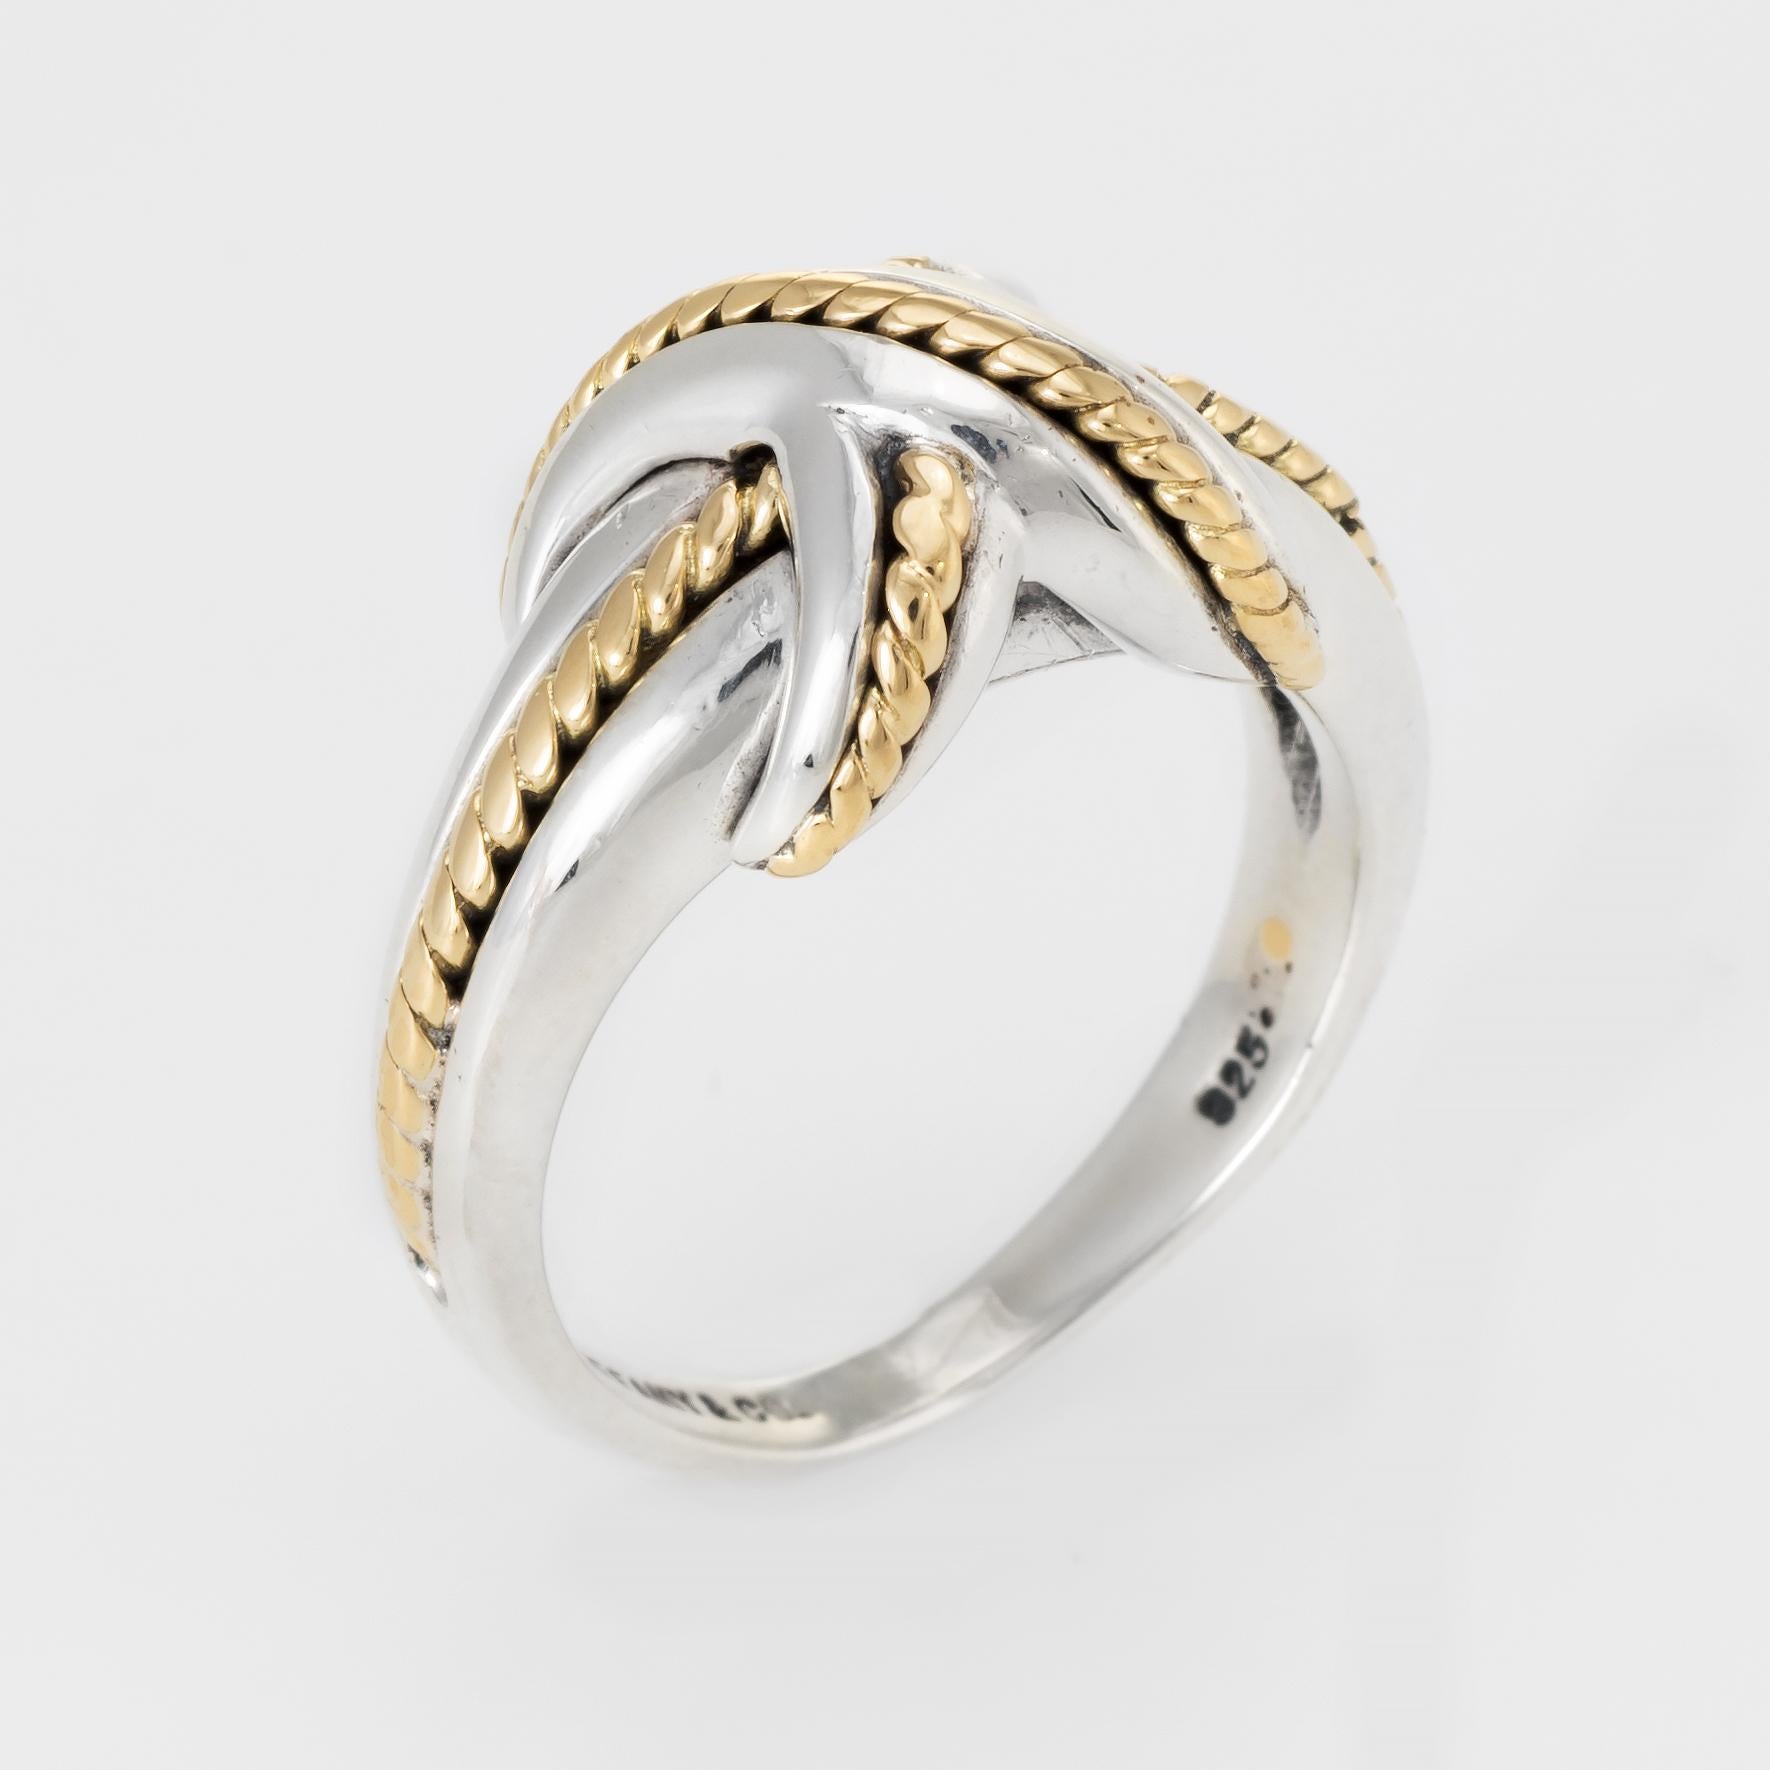 Finely detailed Tiffany & Co signature 'X' ring, crafted in 925 sterling silver and 18 karat yellow gold. 

The ring is in very good condition. Light wear evident to the top of the ring. 

Particulars:

Weight: 7.8 grams

Stones:  N/A 

Size &